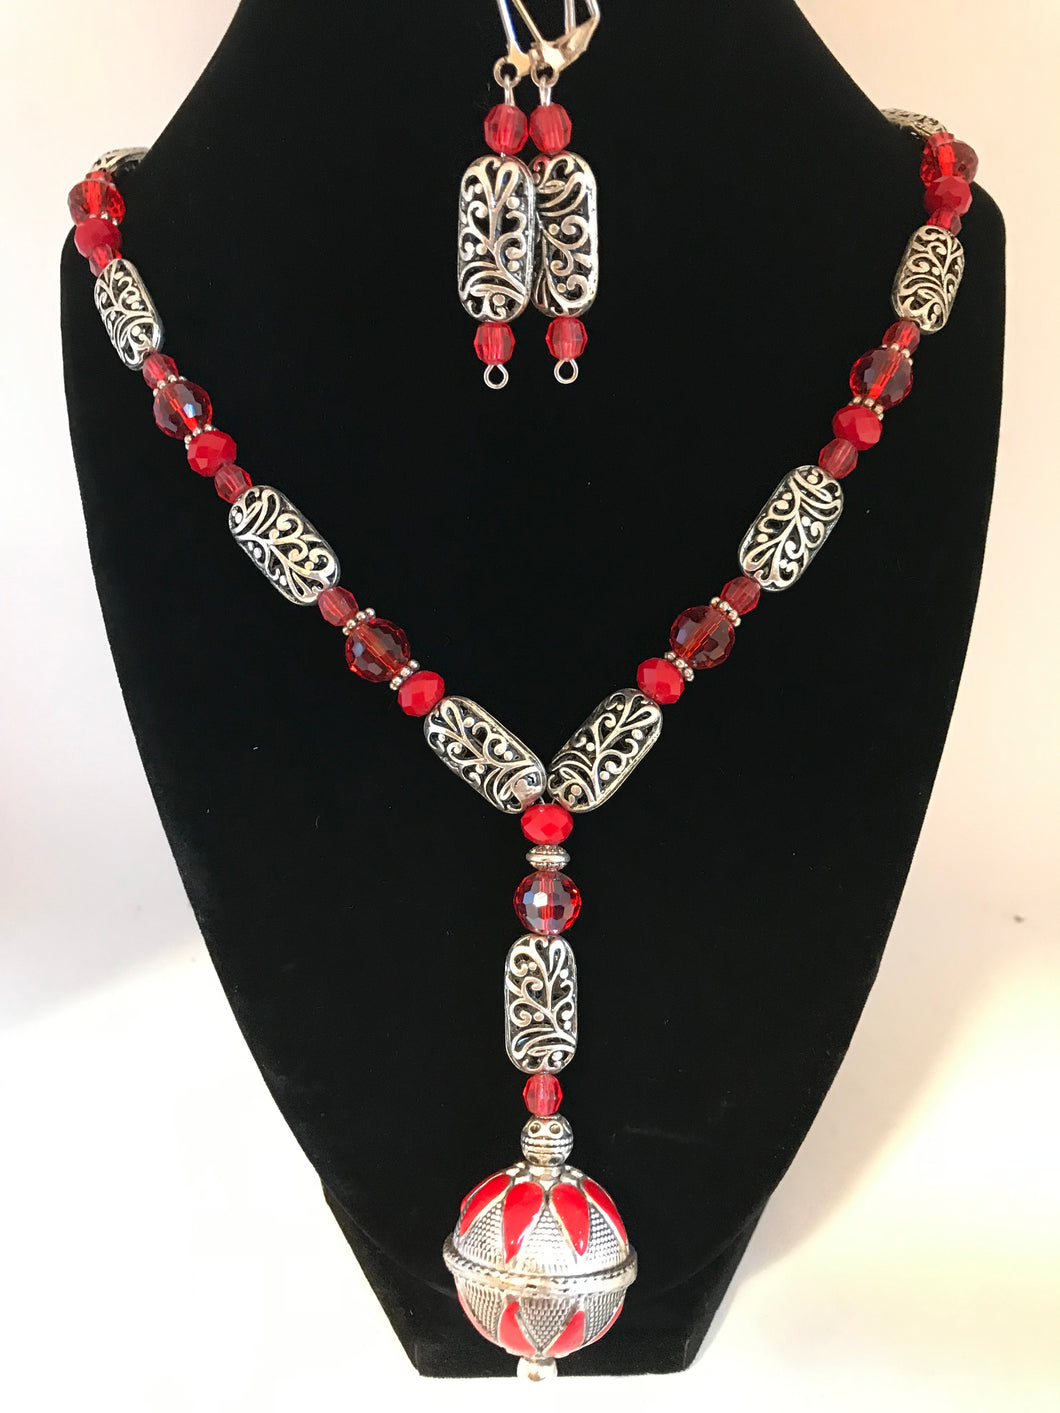 Novelty dangling pendant with assorted red glass and metal beads necklace with matching earrings